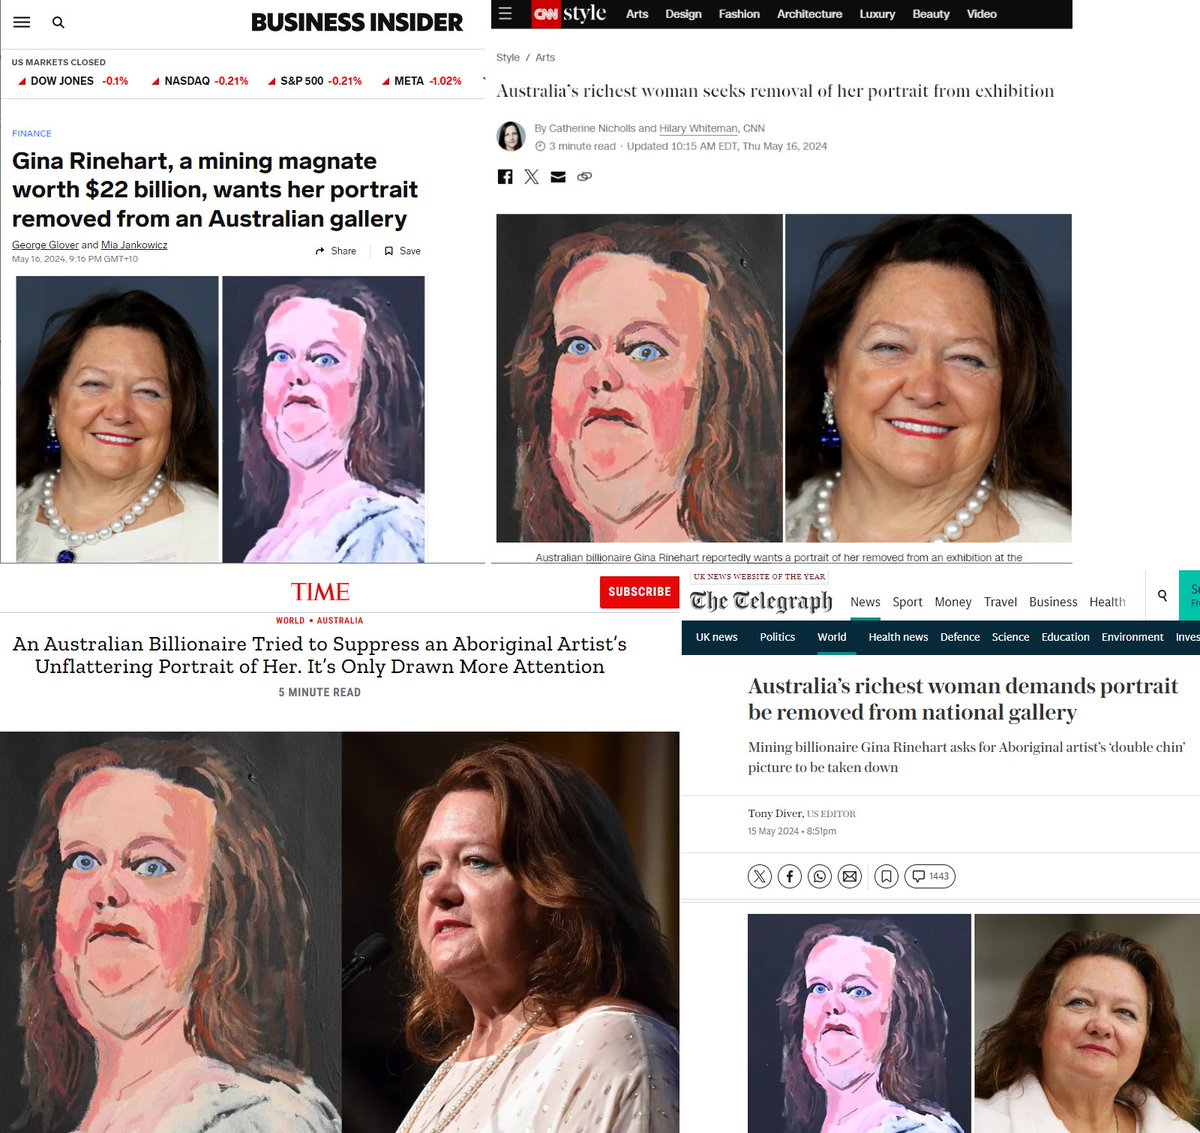 Gina Rinehart tried to stop a handful of Canberra art hipsters from seeing this picture of her, so now the whole world has seen it. 

But please tell me again how billionaires are naturally smarter than the rest of us.